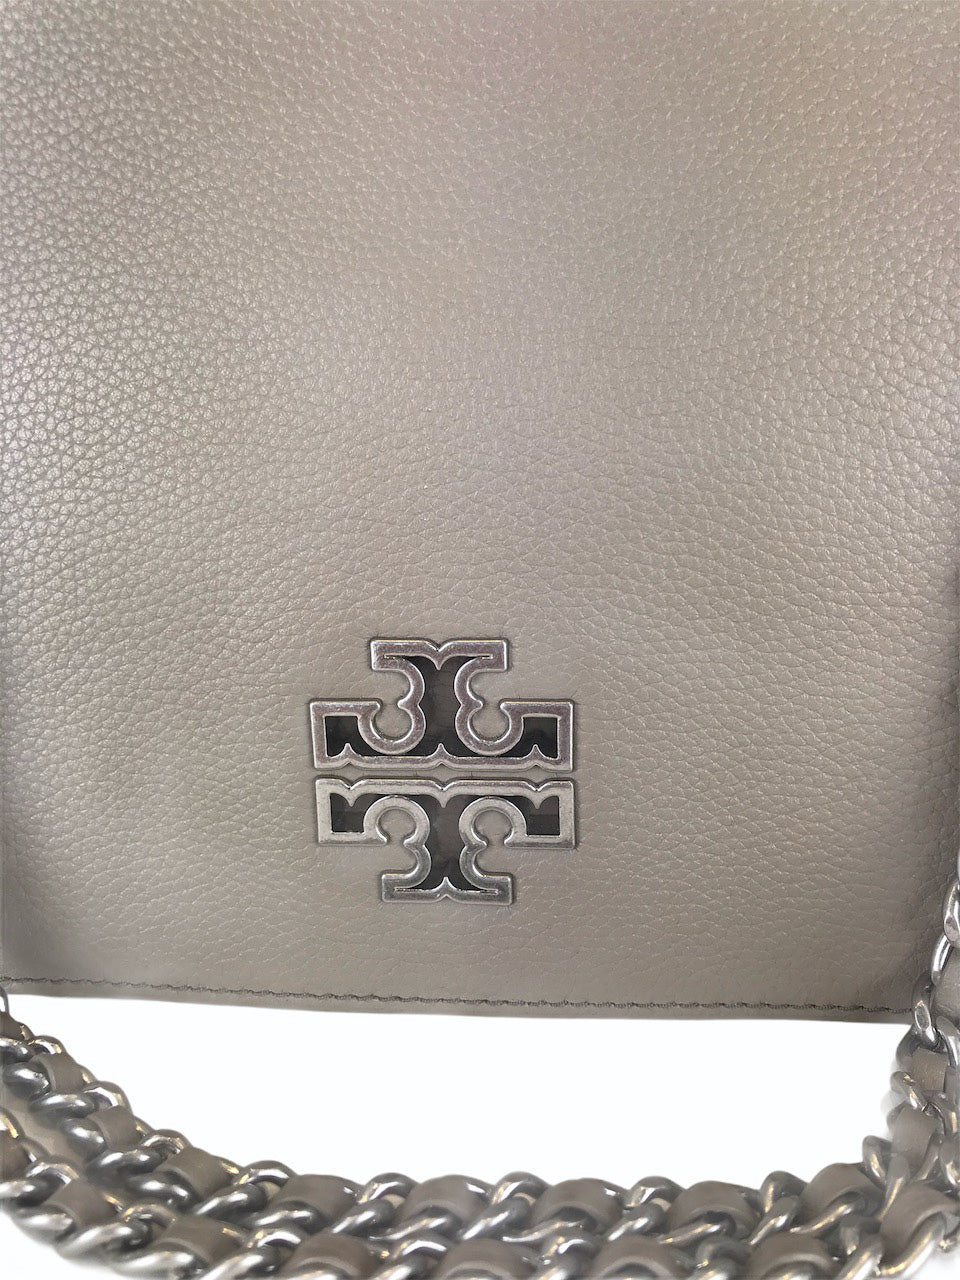 Tory Burch Taupe Grey Leather Shoulder Bag - As Seen On Instagram 09/09/2020 - Siopaella Designer Exchange